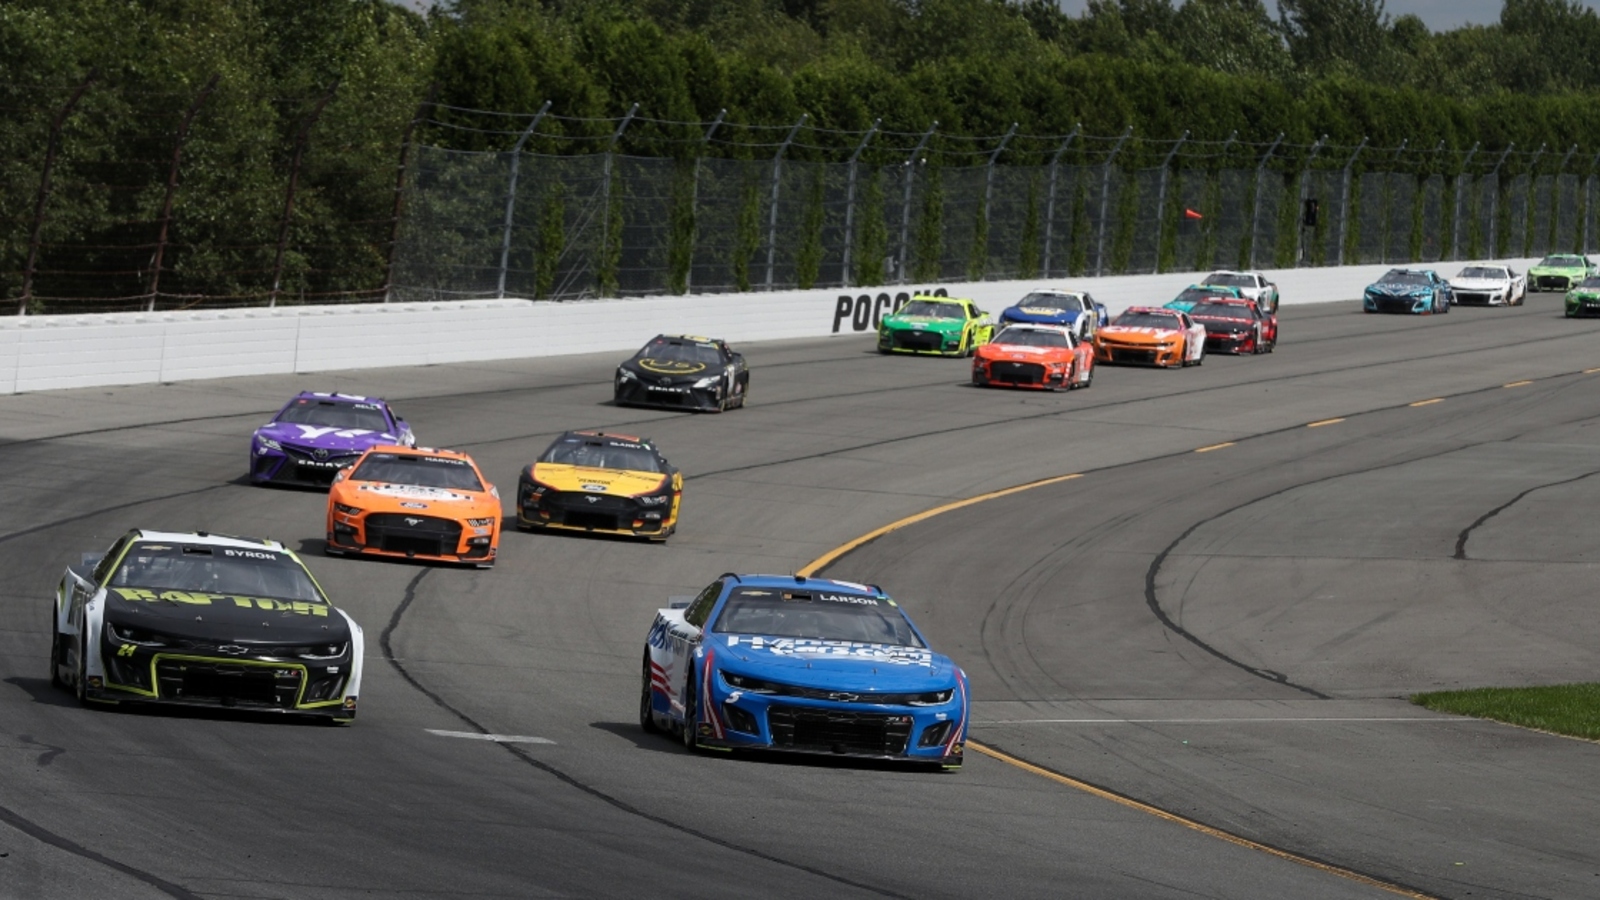 No penalties expected from NASCAR after heated Pocono incidents